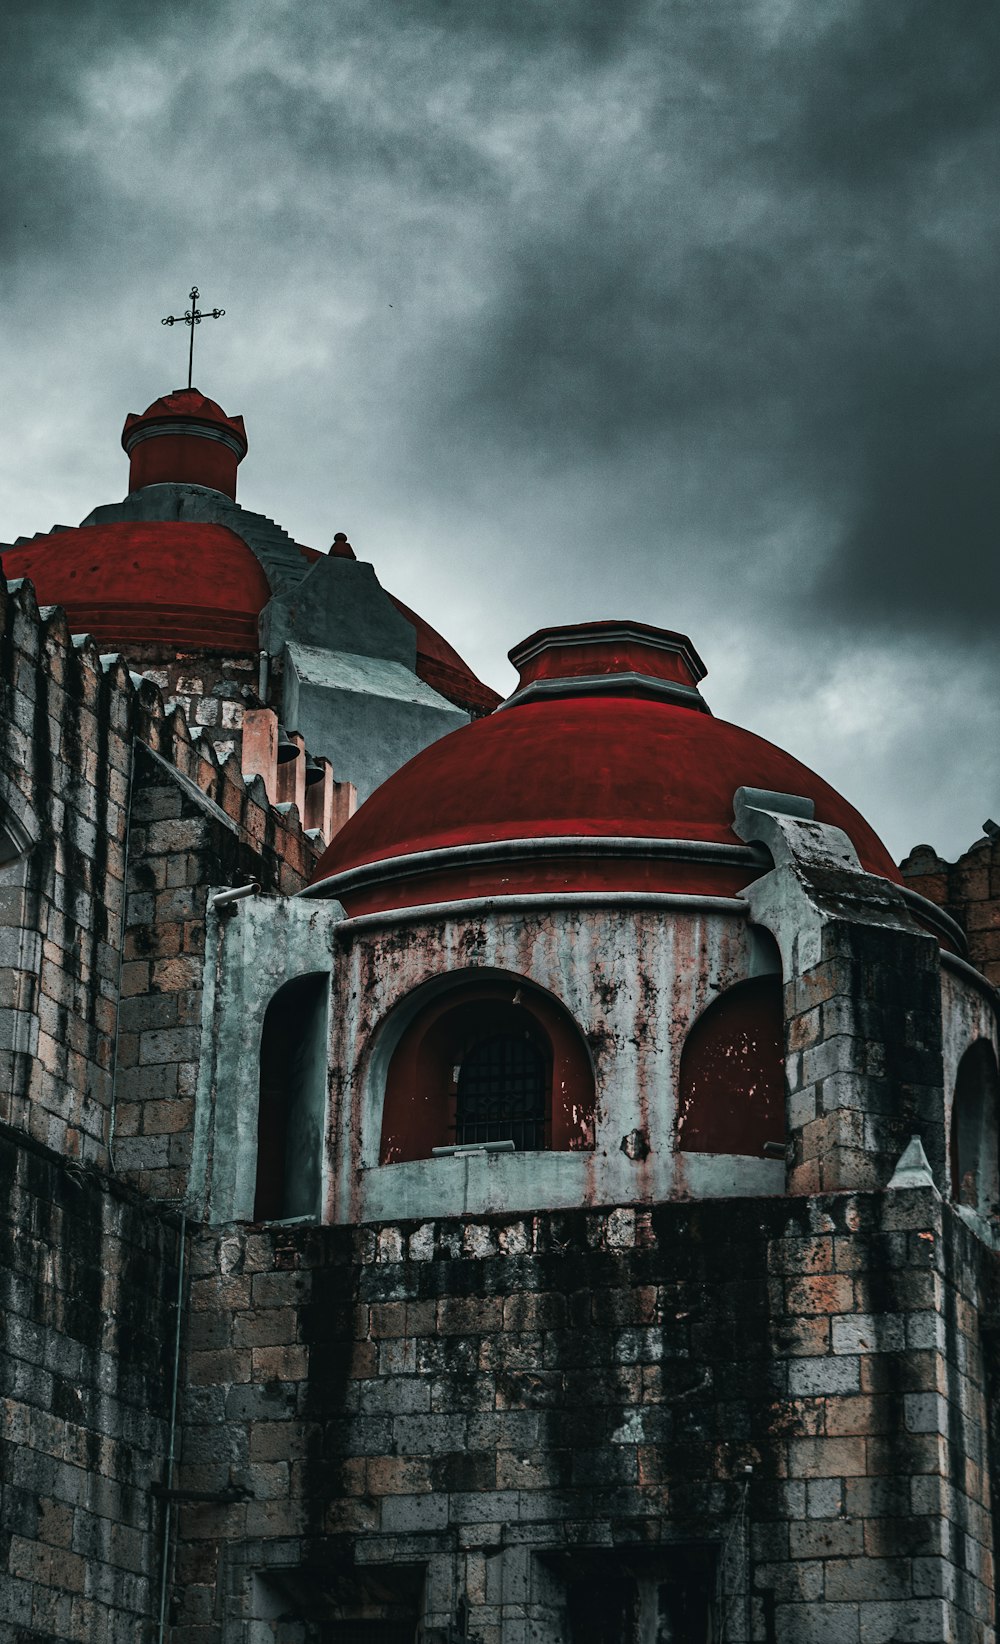 a red dome on top of a building under a cloudy sky